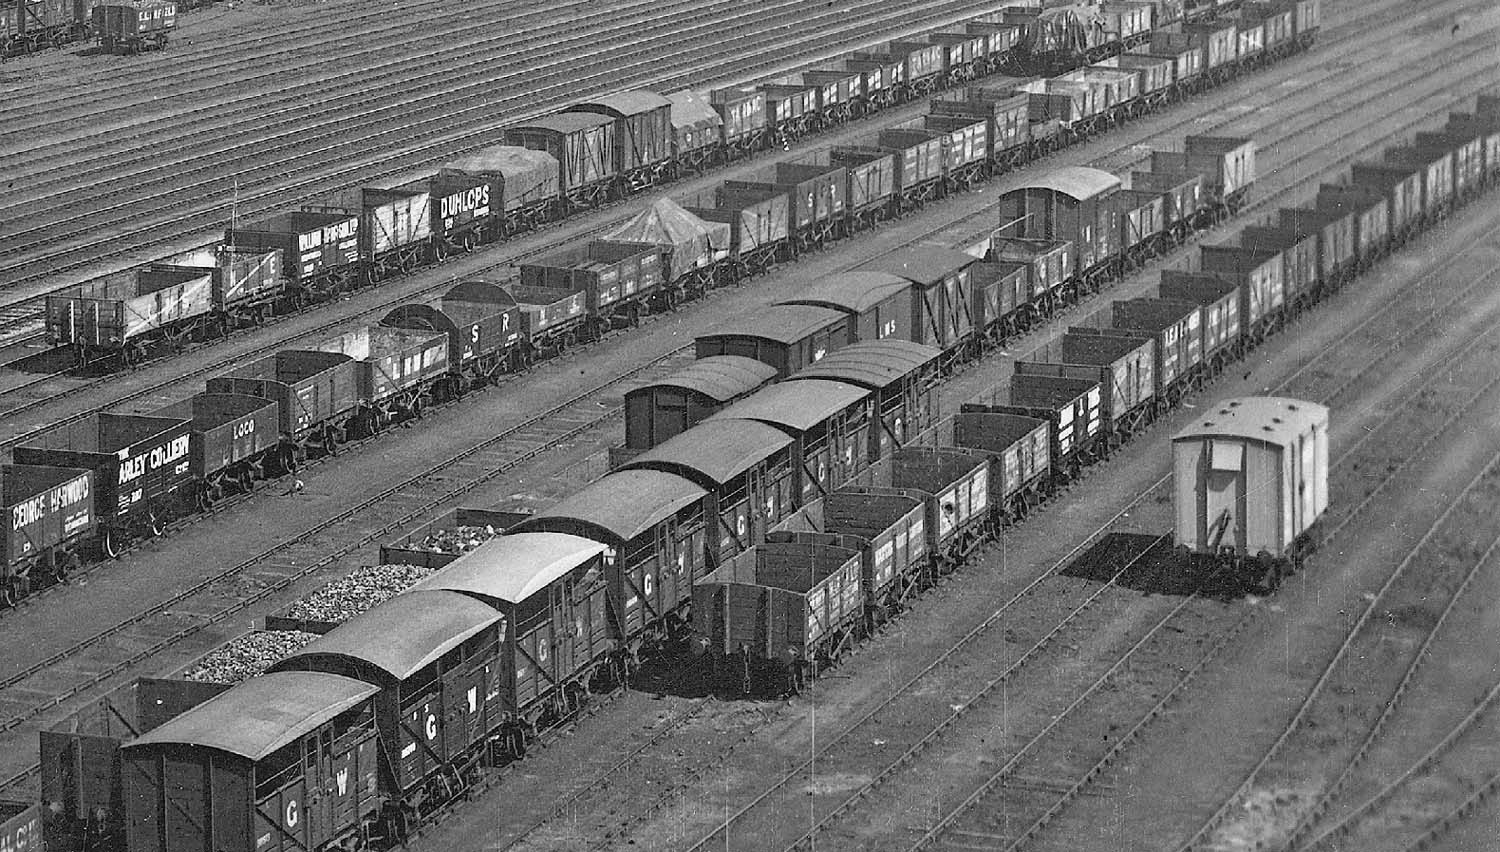 Close up showing the selection of wagons on view which is of great interest as many of them are quite freshly painted